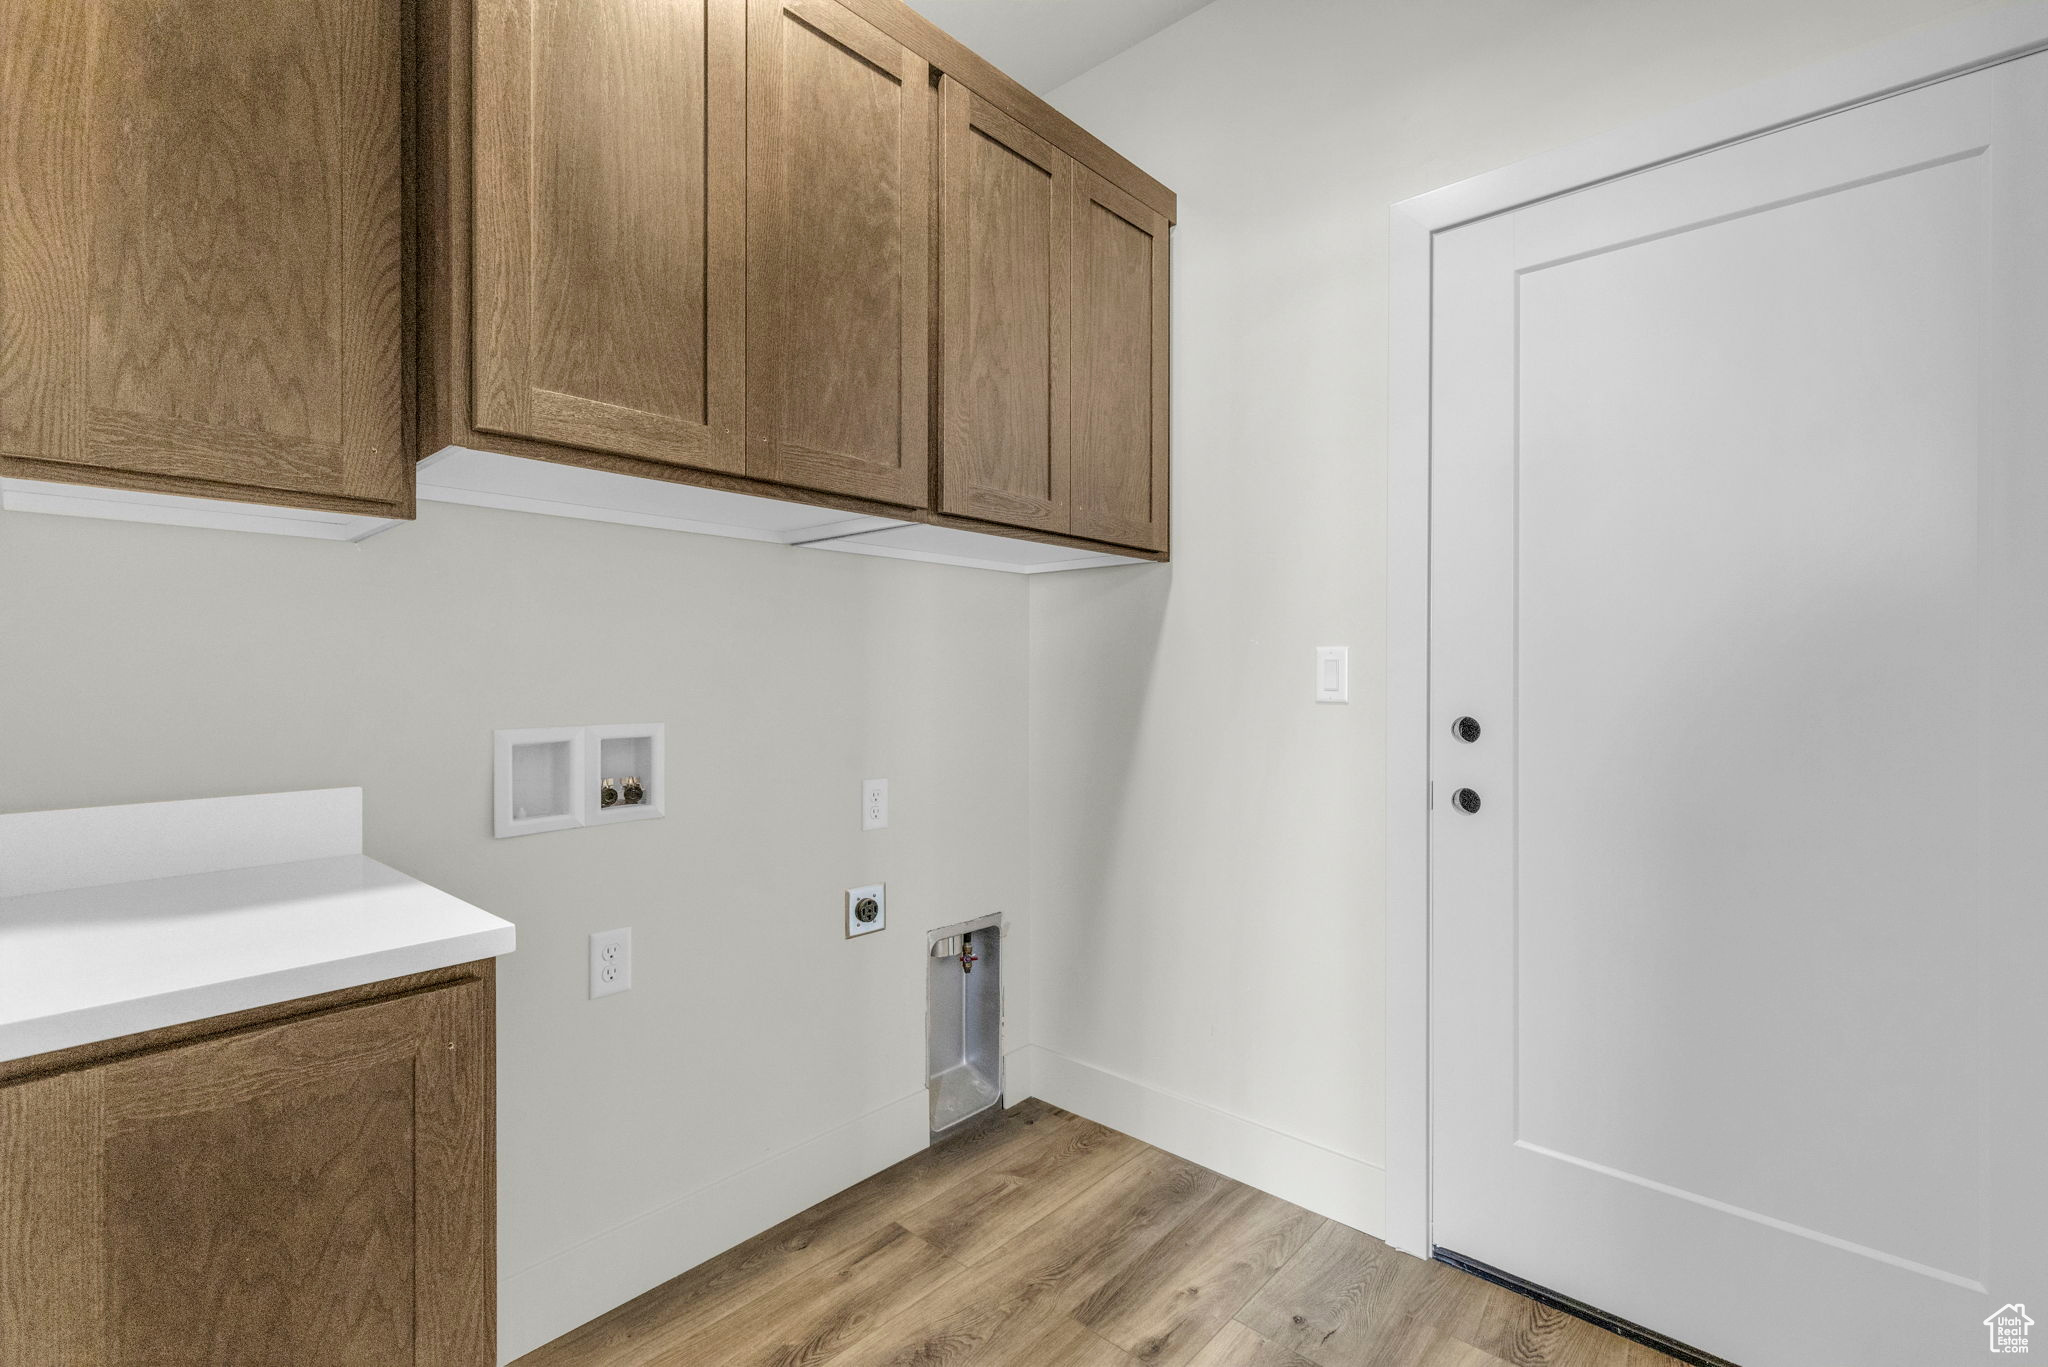 Laundry room with hookup for a washing machine, light hardwood / wood-style flooring, hookup for an electric dryer, and cabinets